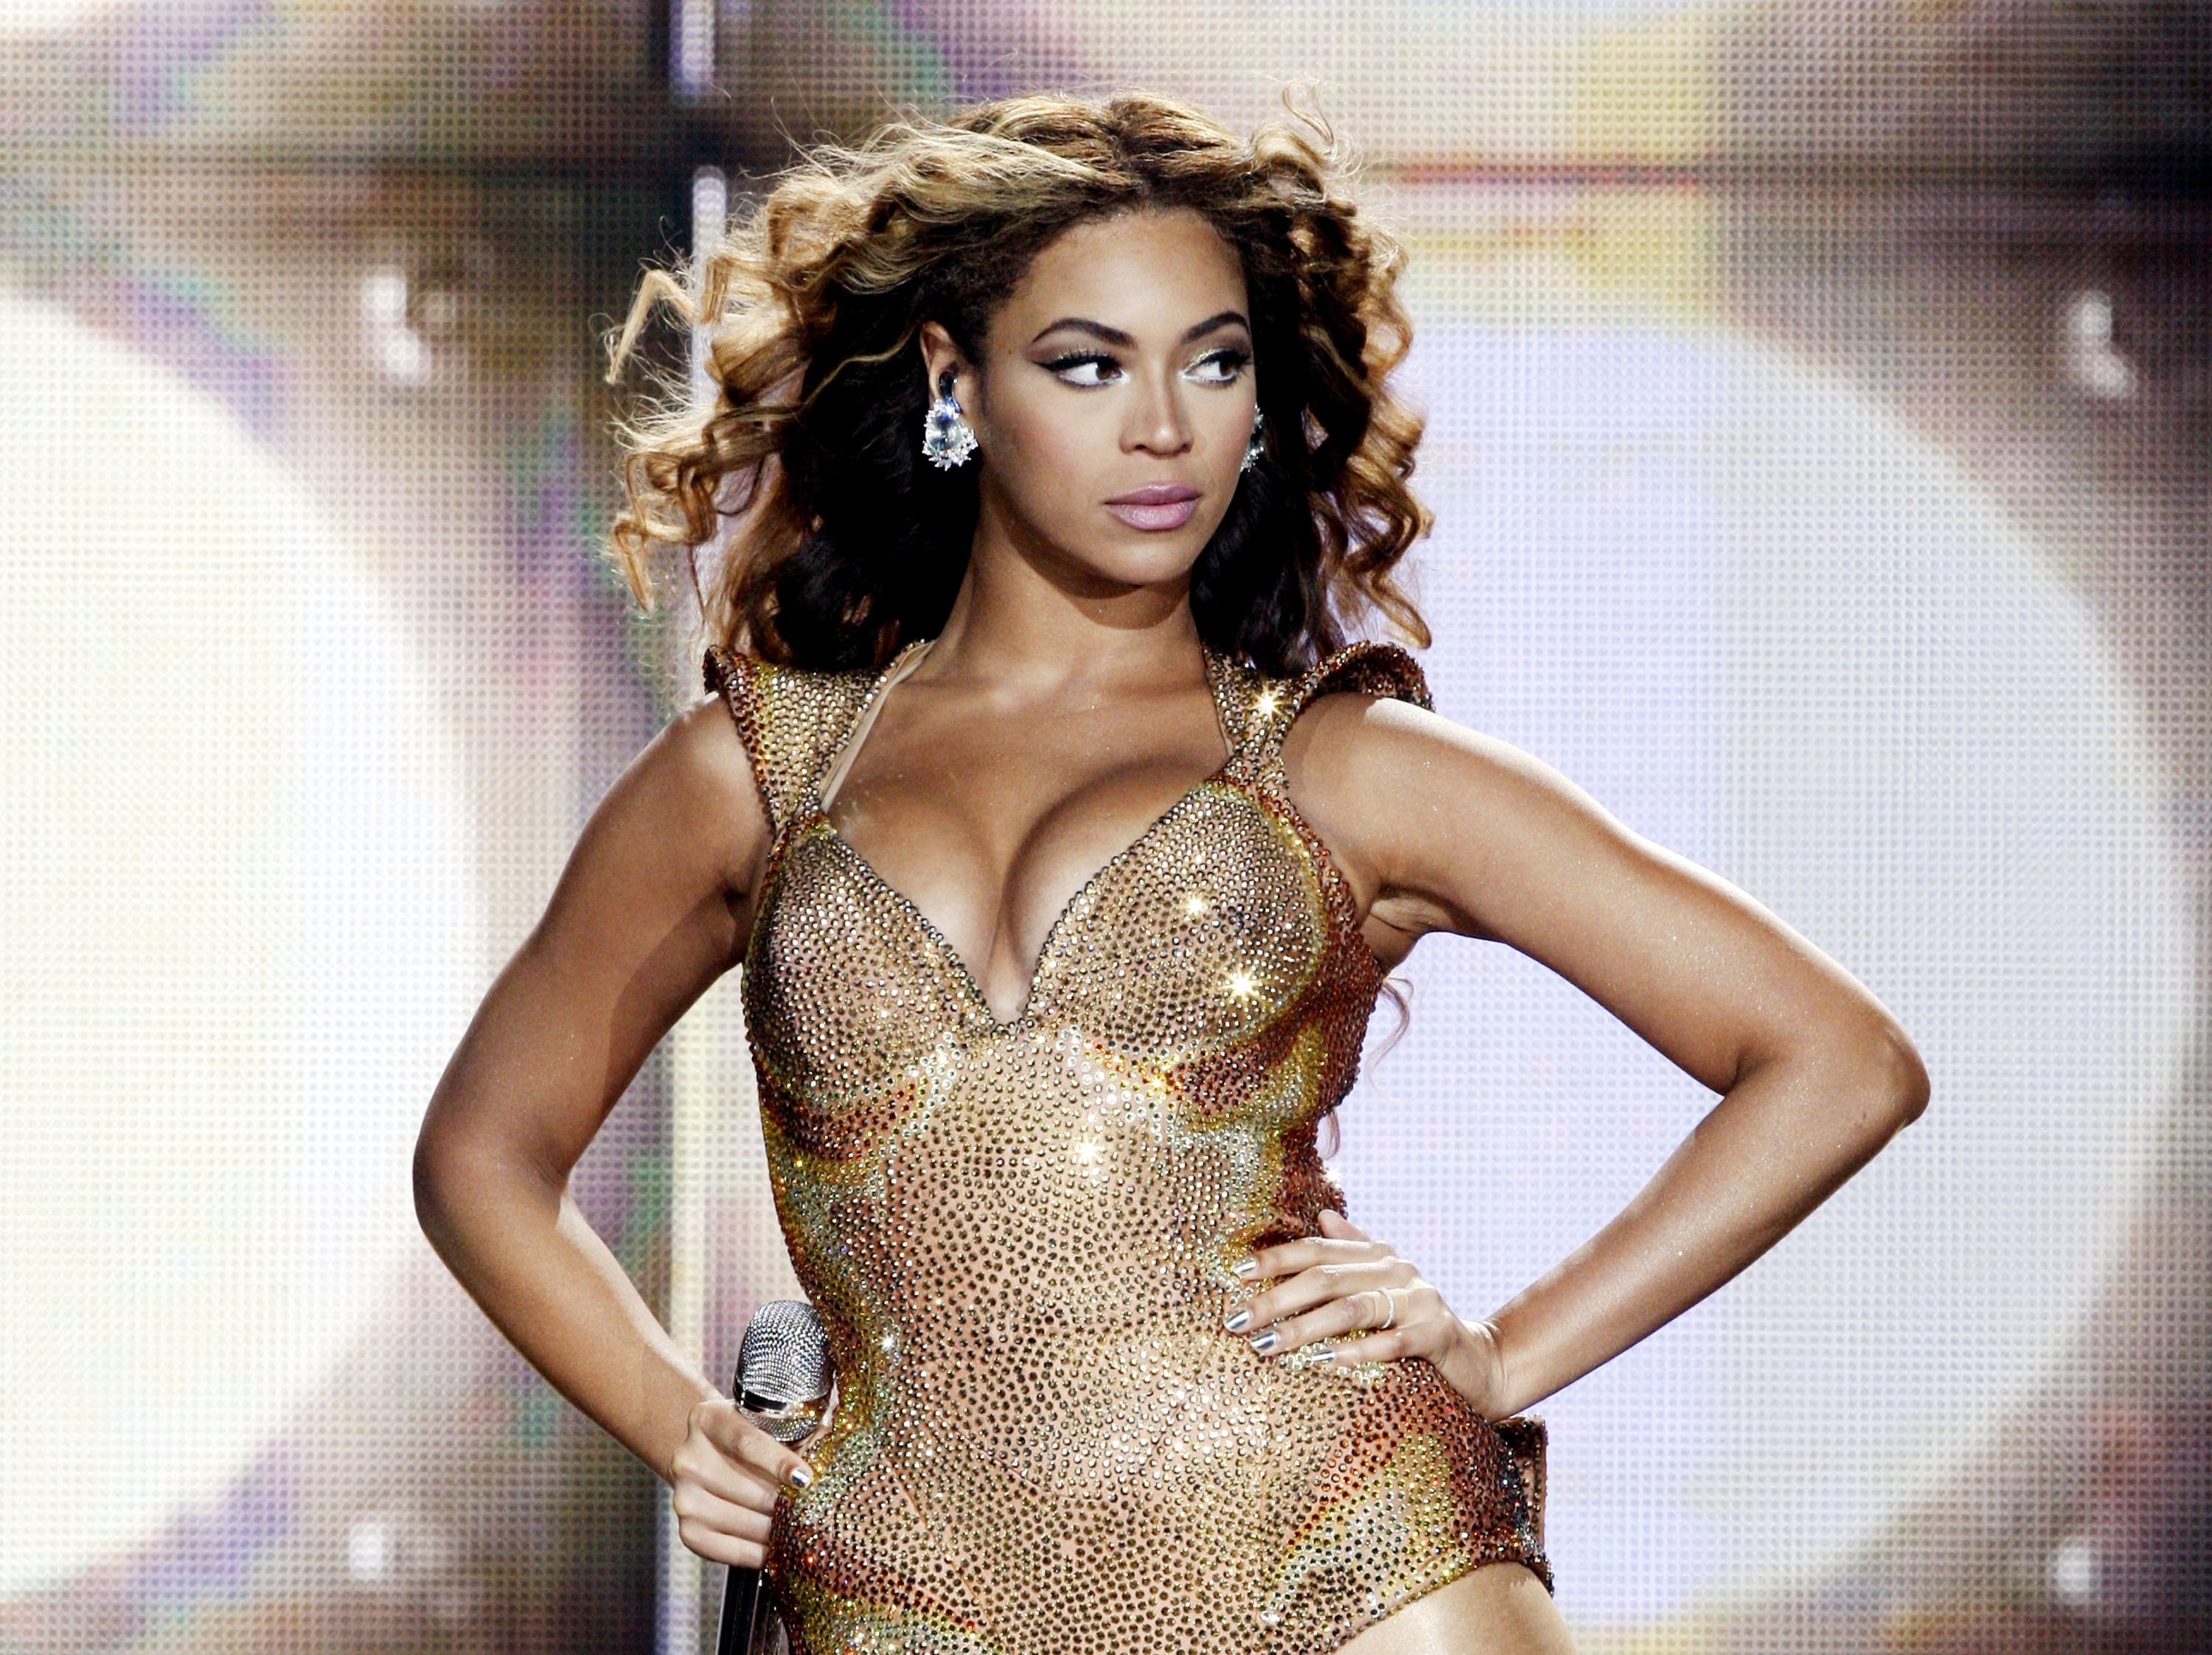 Beyoncé wearing a sparkly outfit